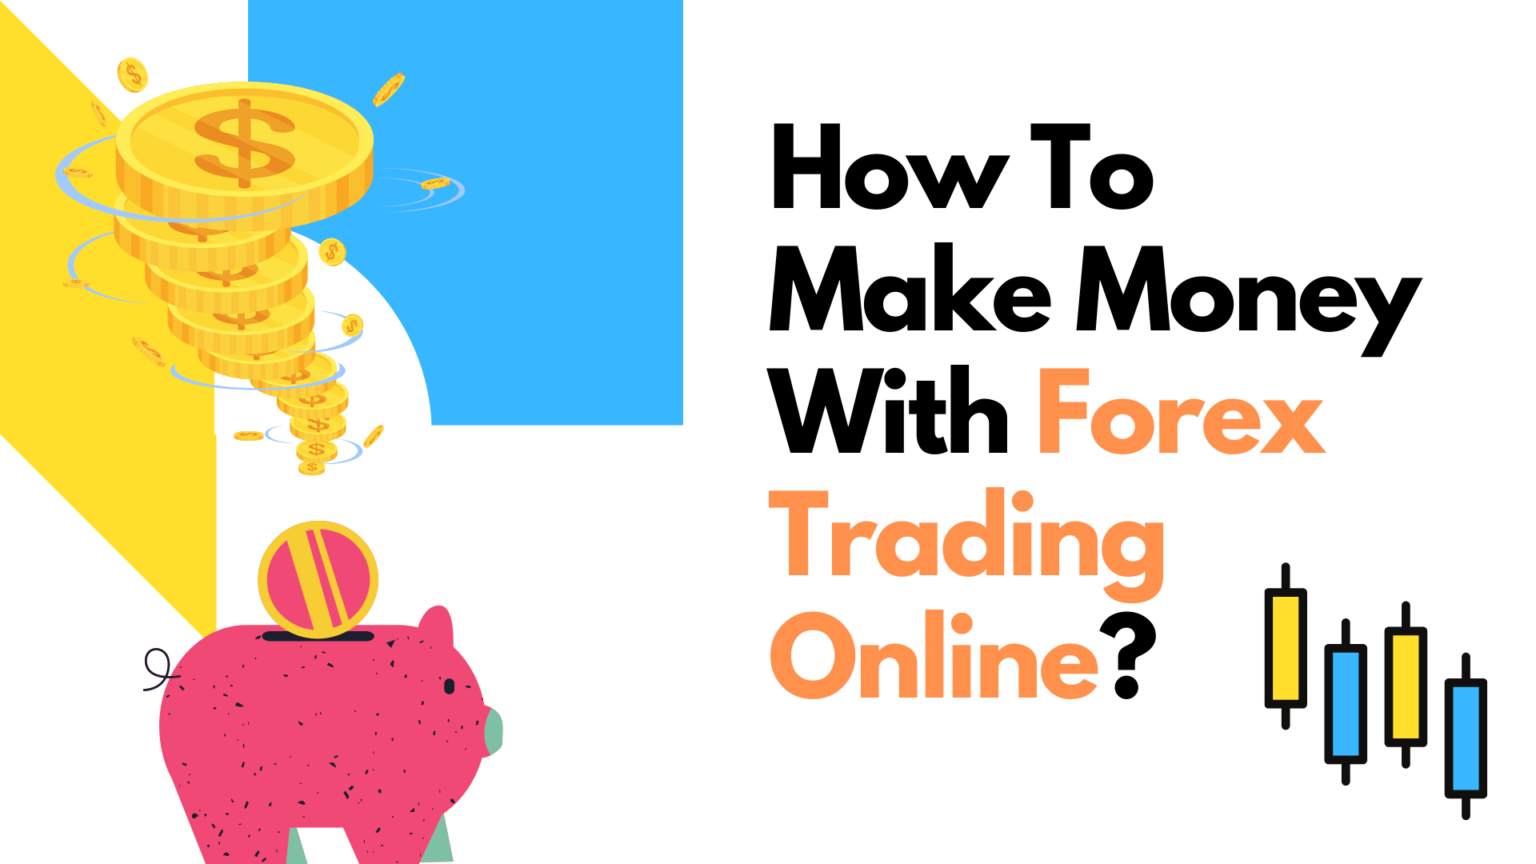 How To Make Money With Forex Trading Online